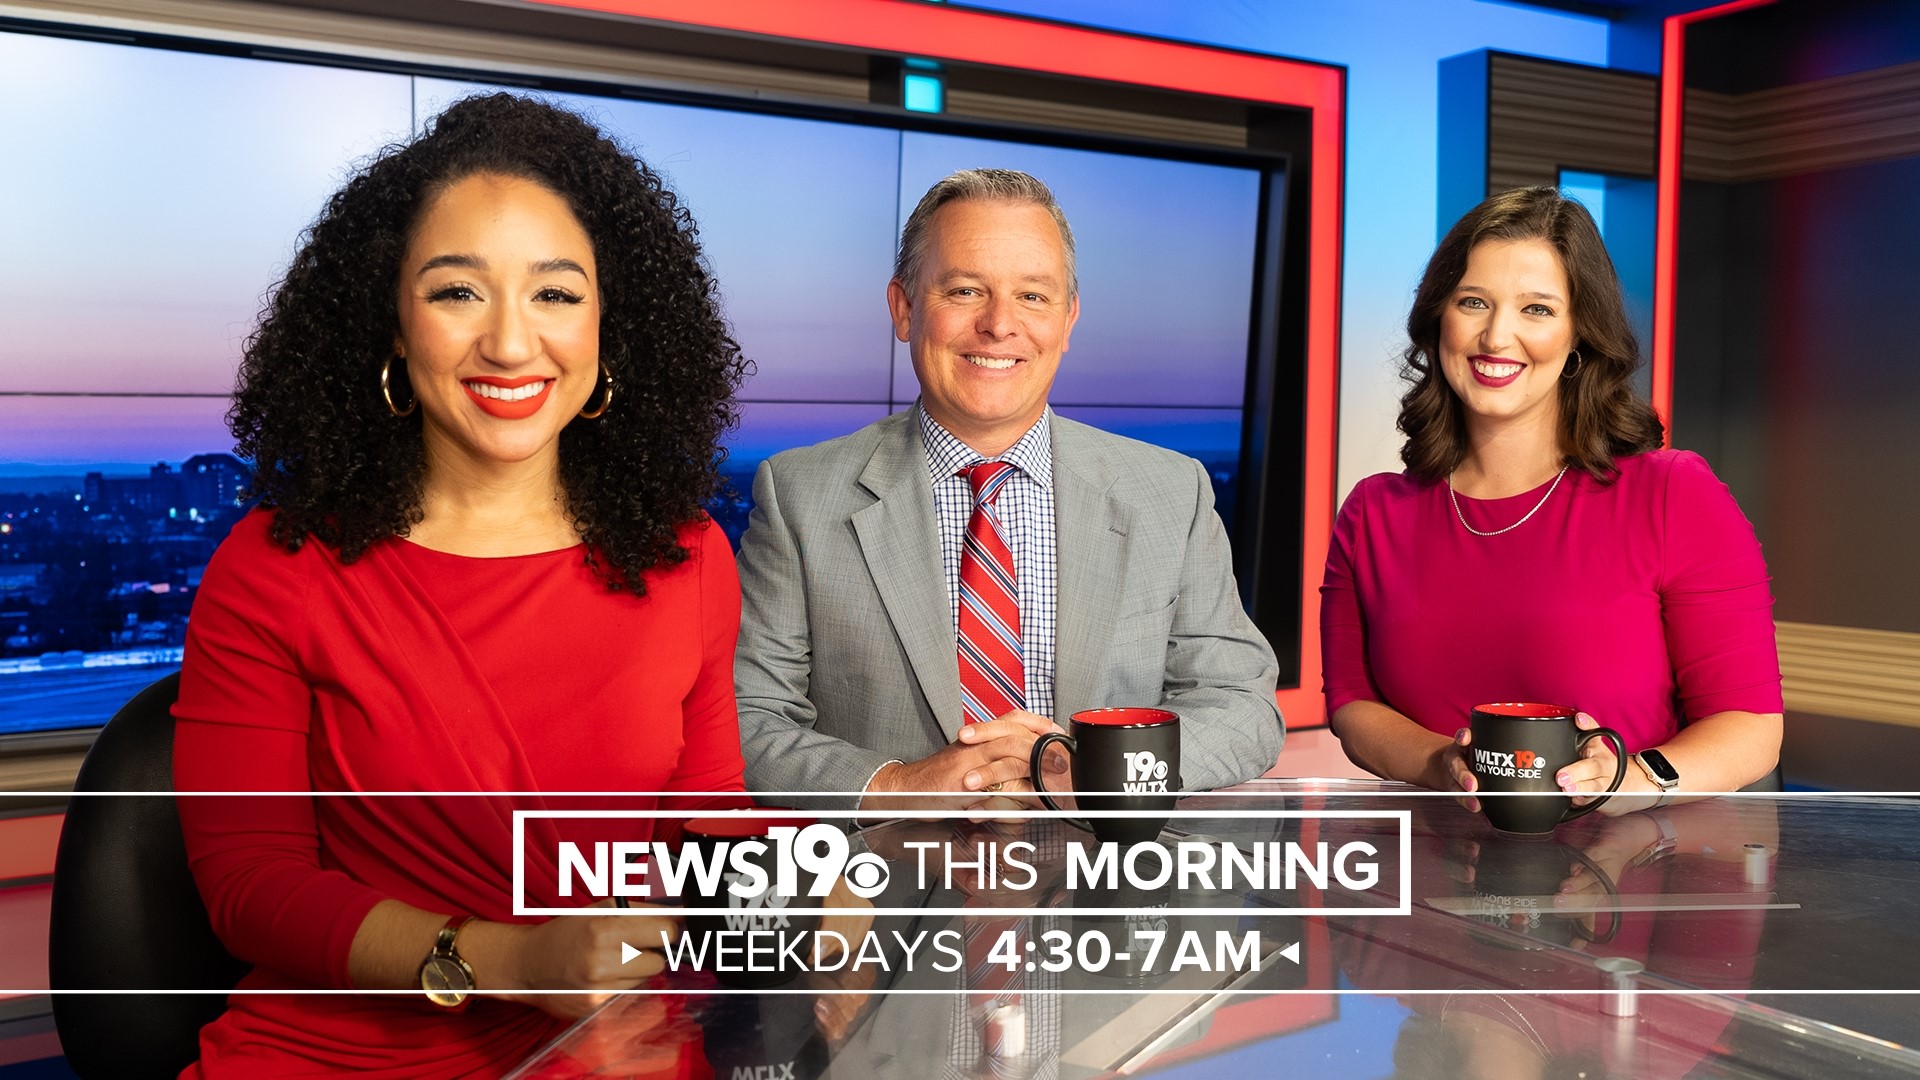 Current news and events of the day, local topics in the Columbia area, weather forecasts, sports and more are covered by the News19 team.